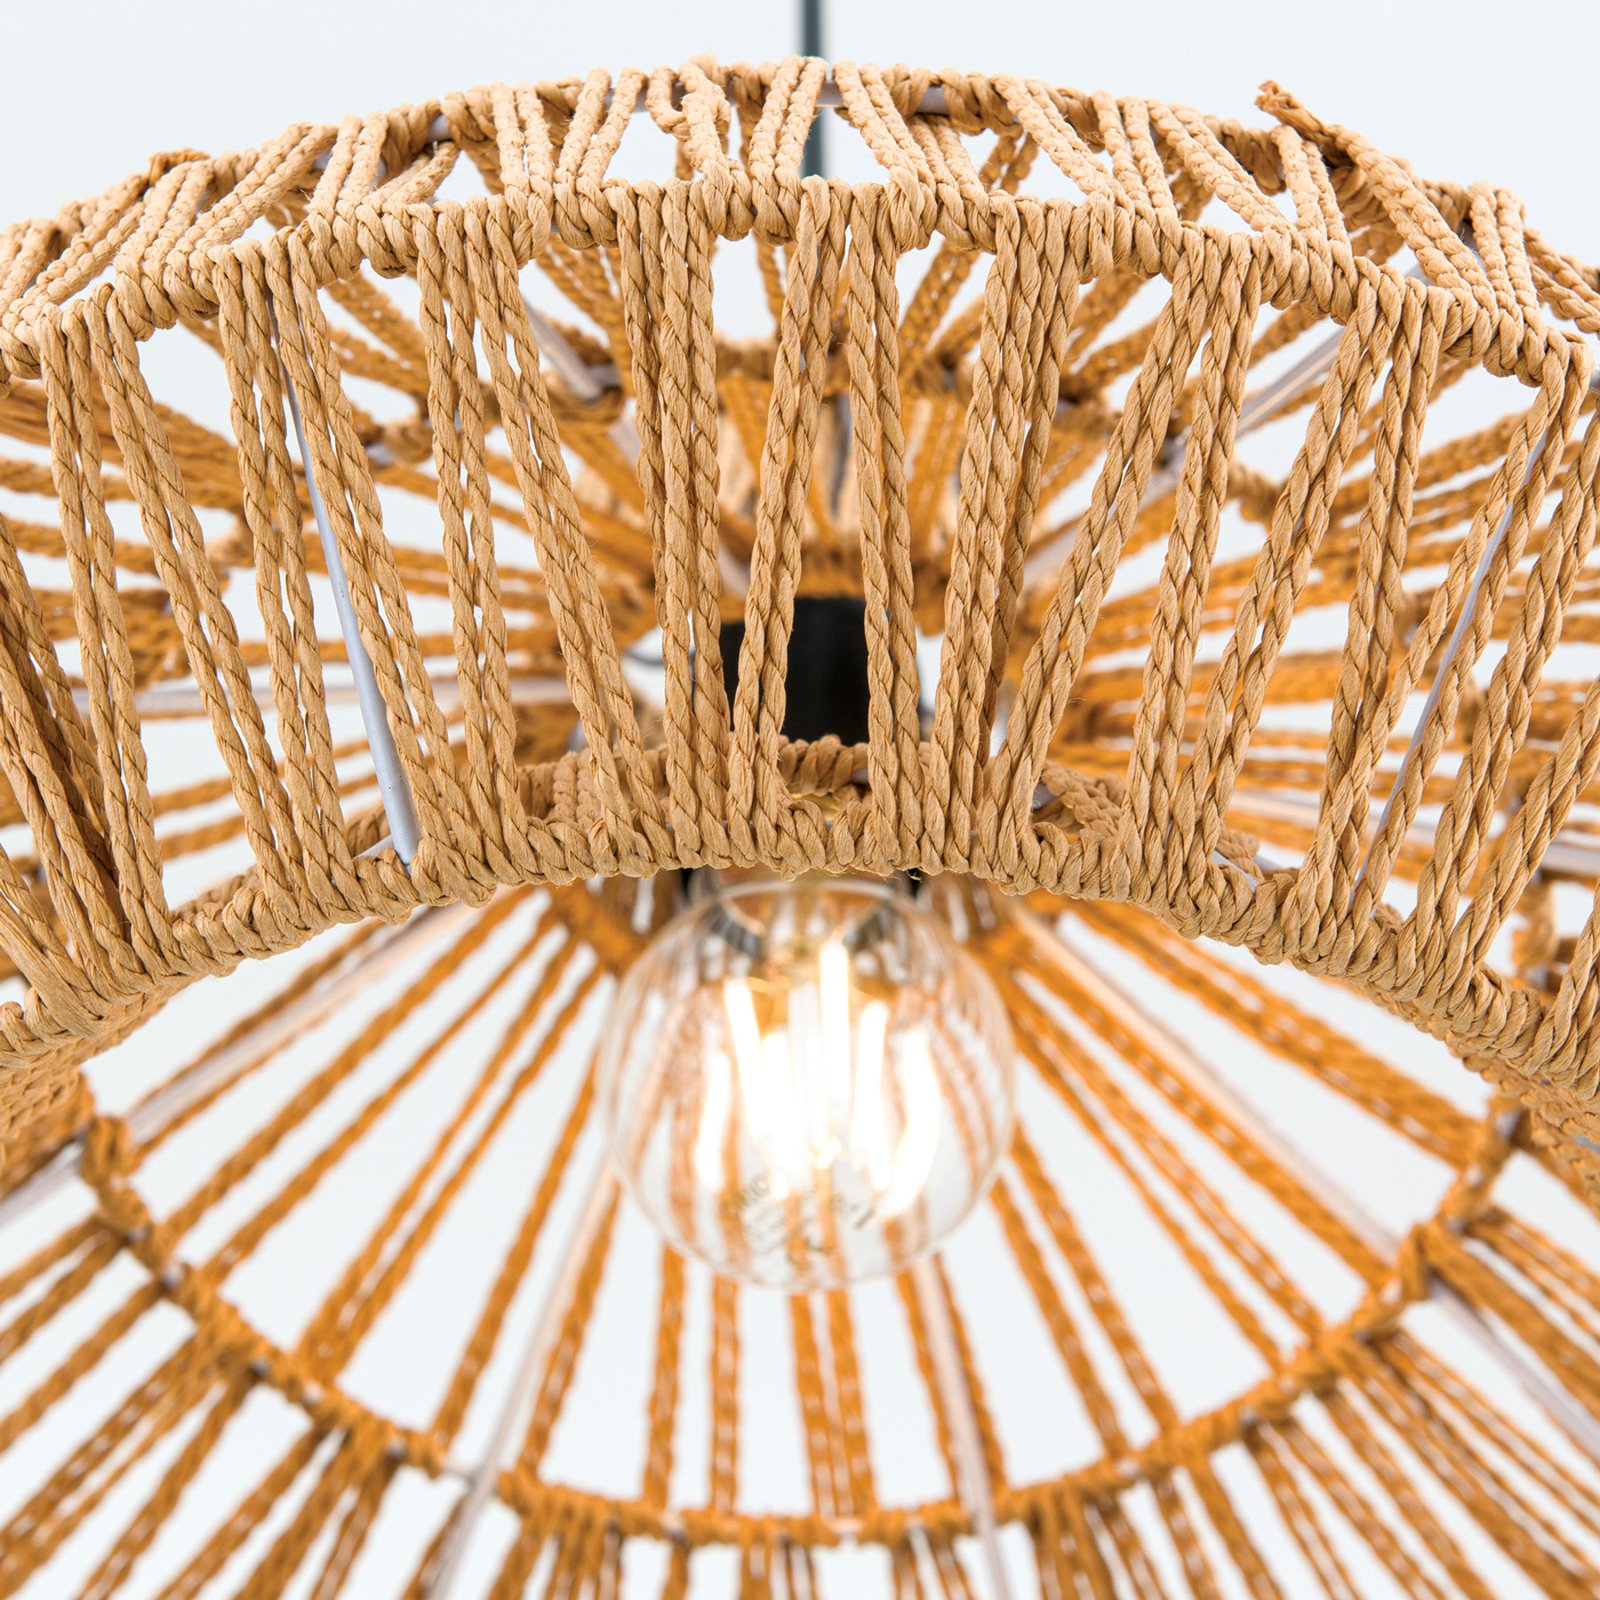 Basket pendant light with a lampshade of hemp cord